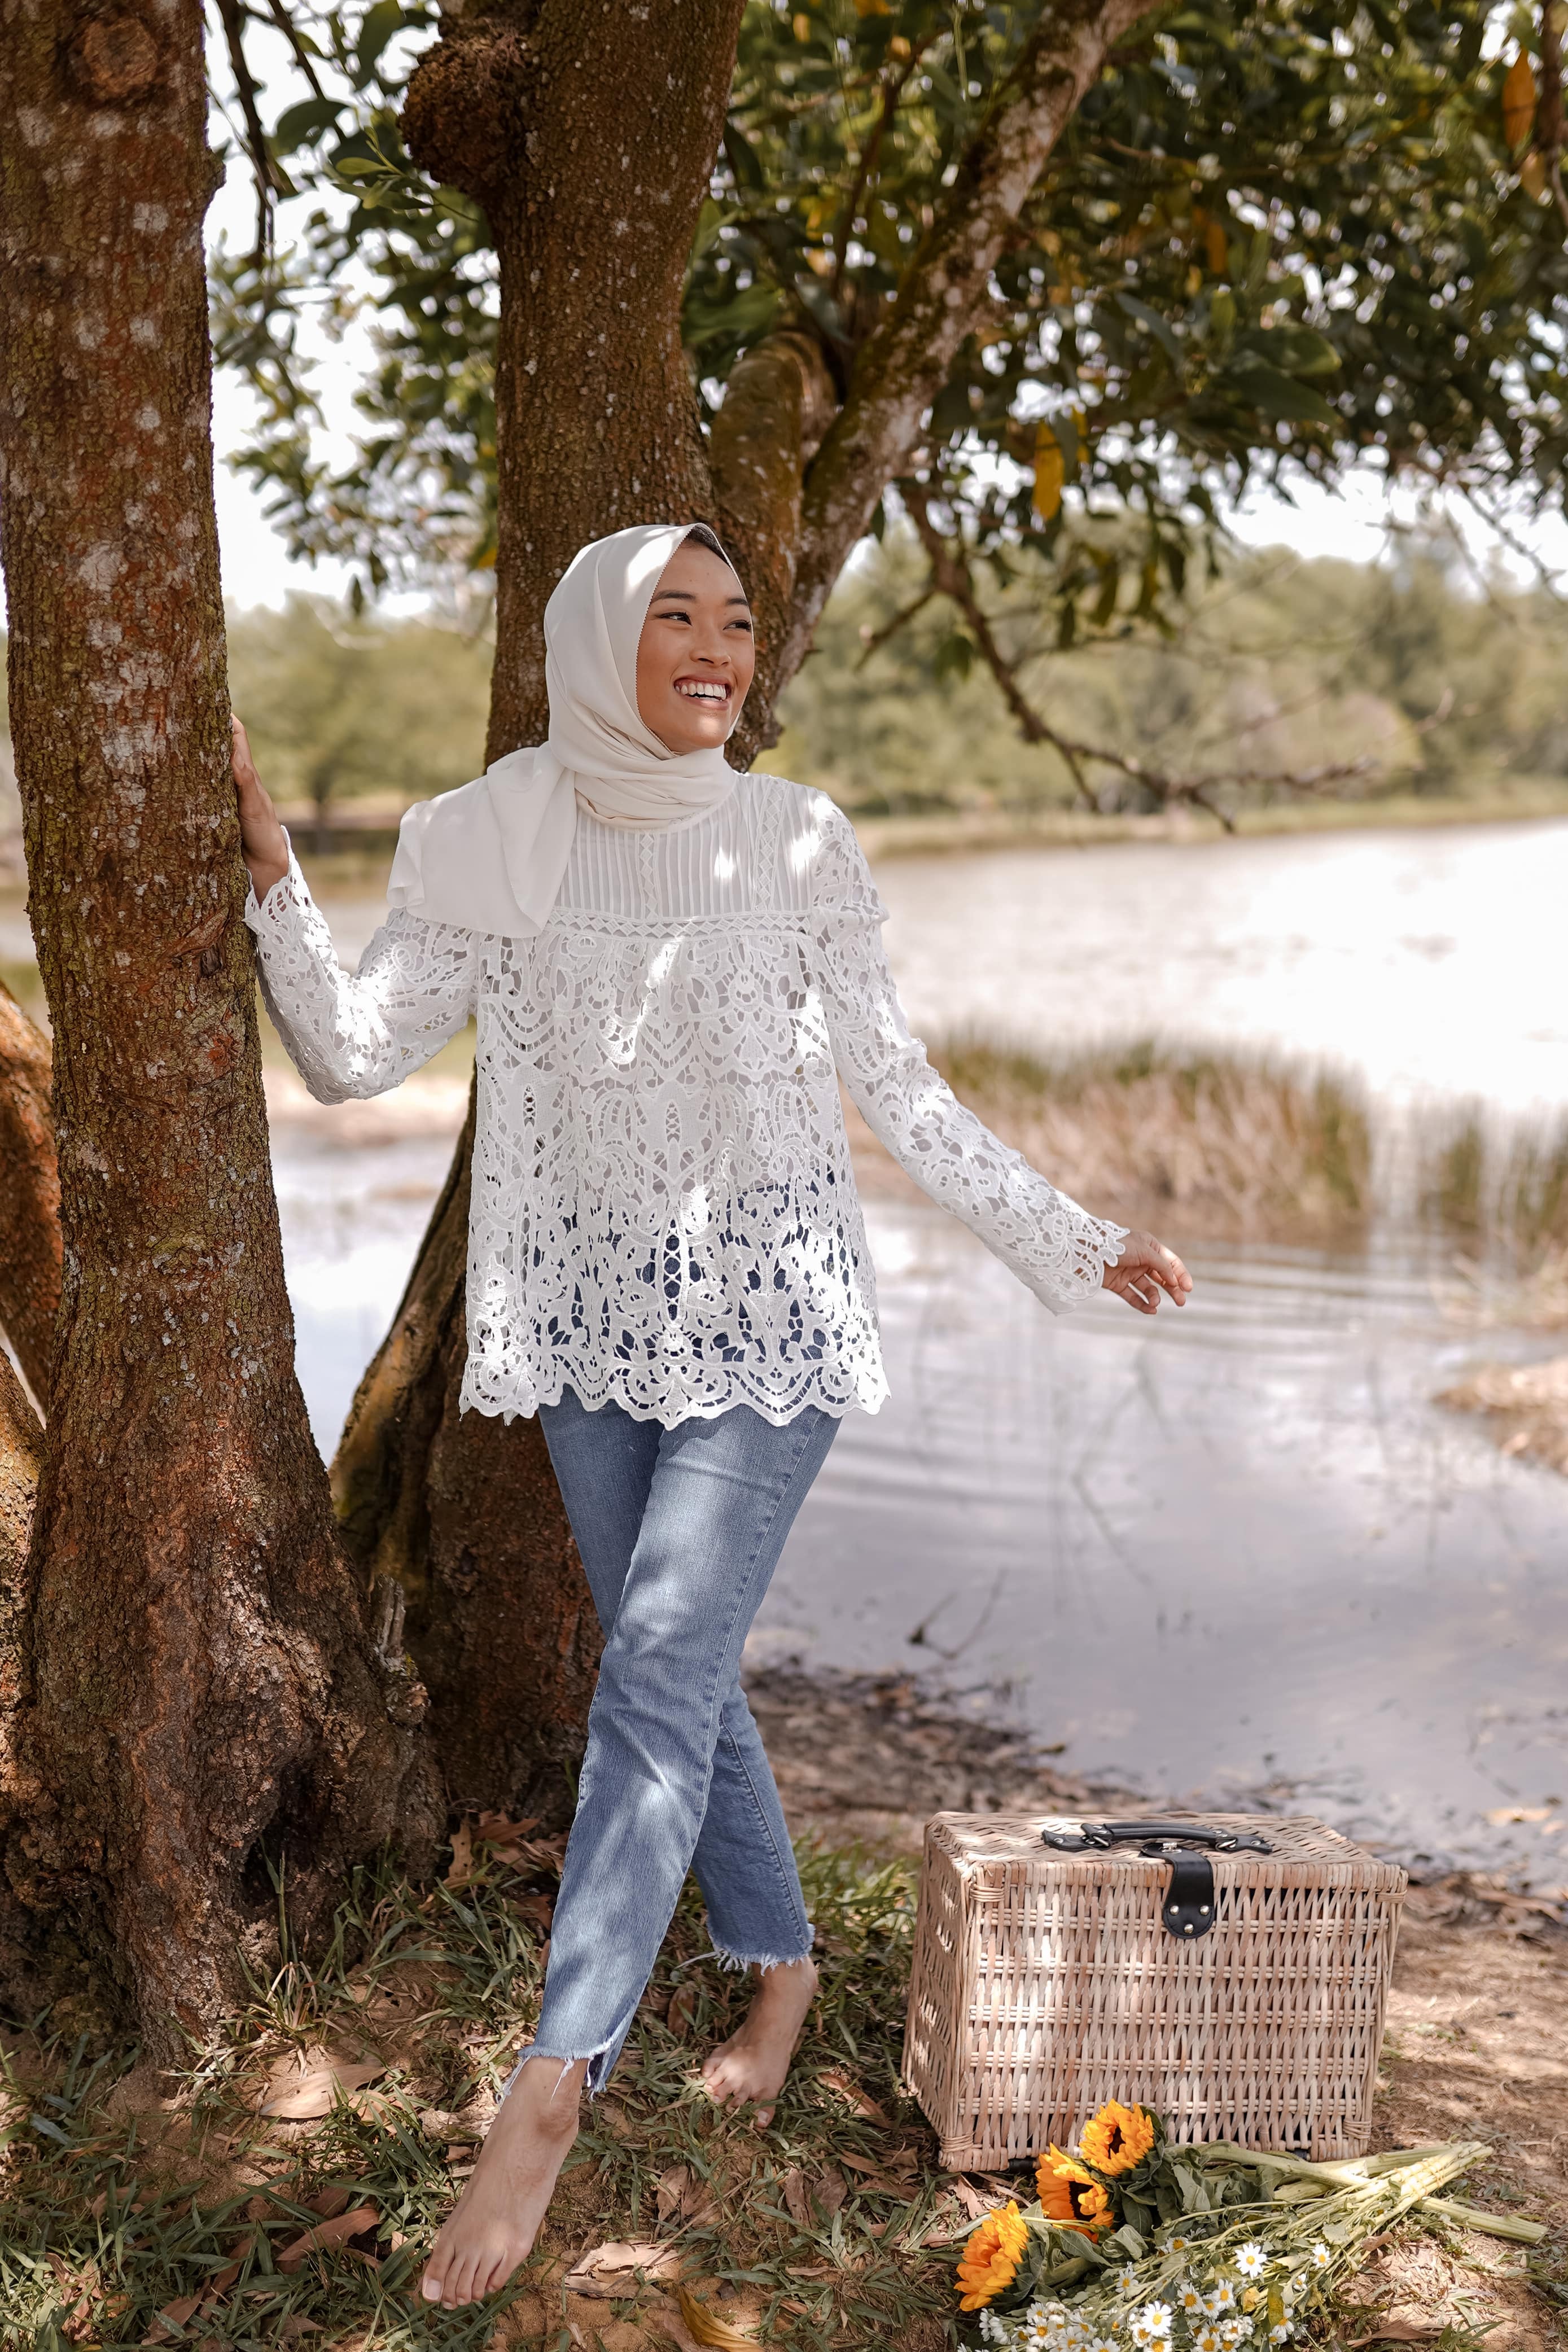 Female malaysian model wearing a high quality laced top made by petit moi. posing by the tree and lake